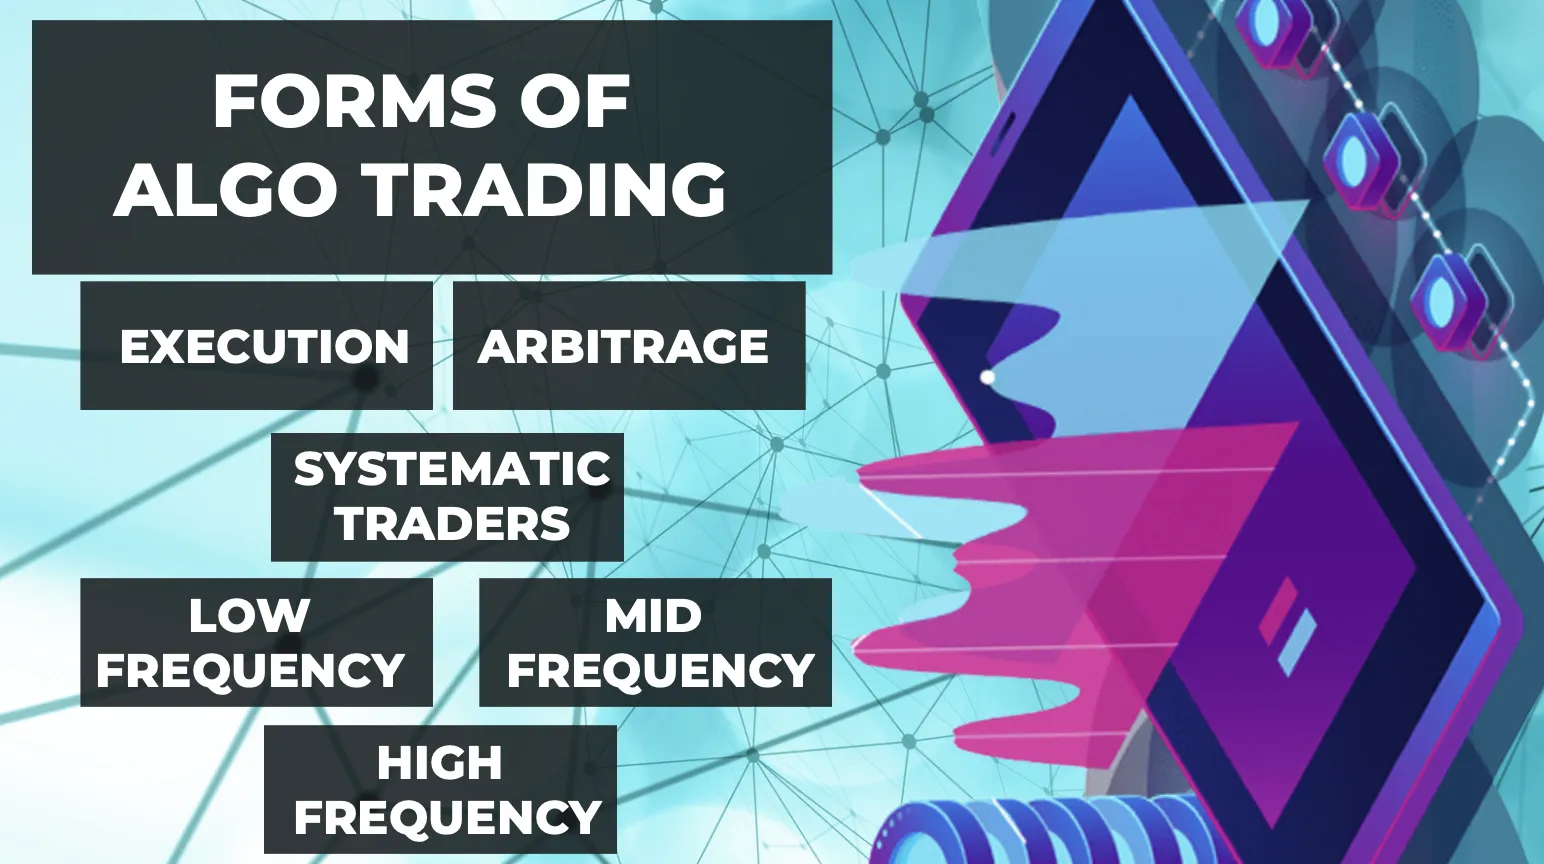 Forms of Algo Trading